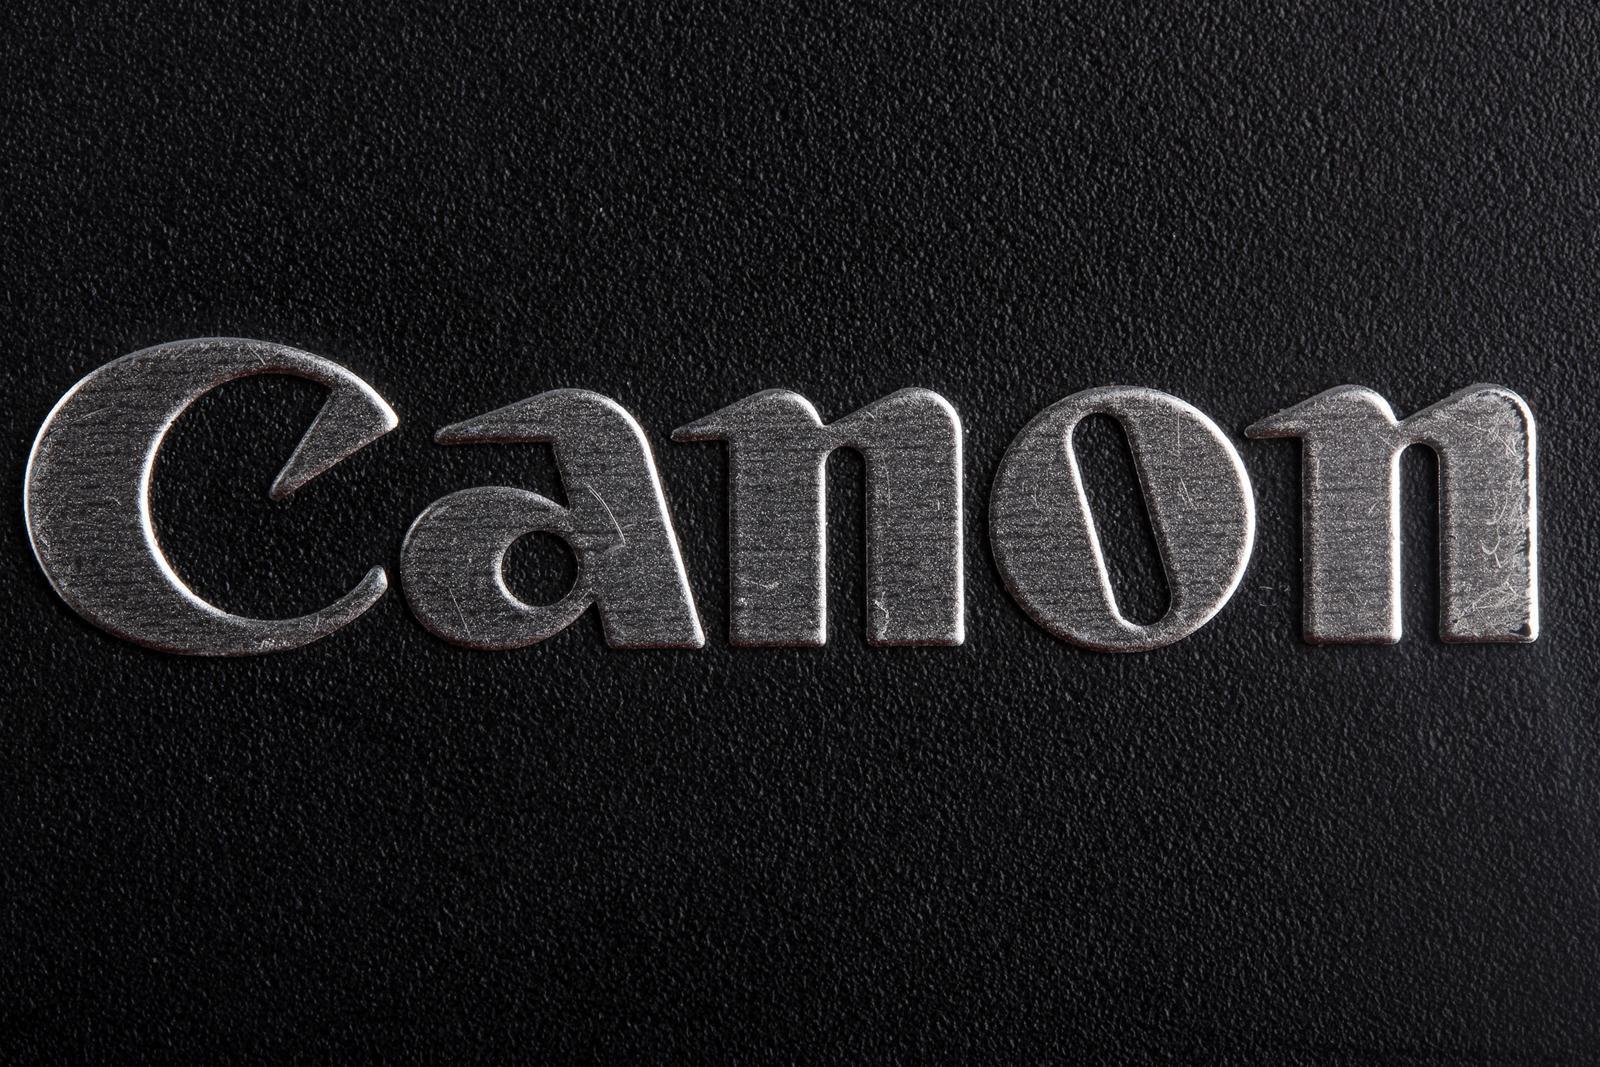 Canon Camera Wallpapers